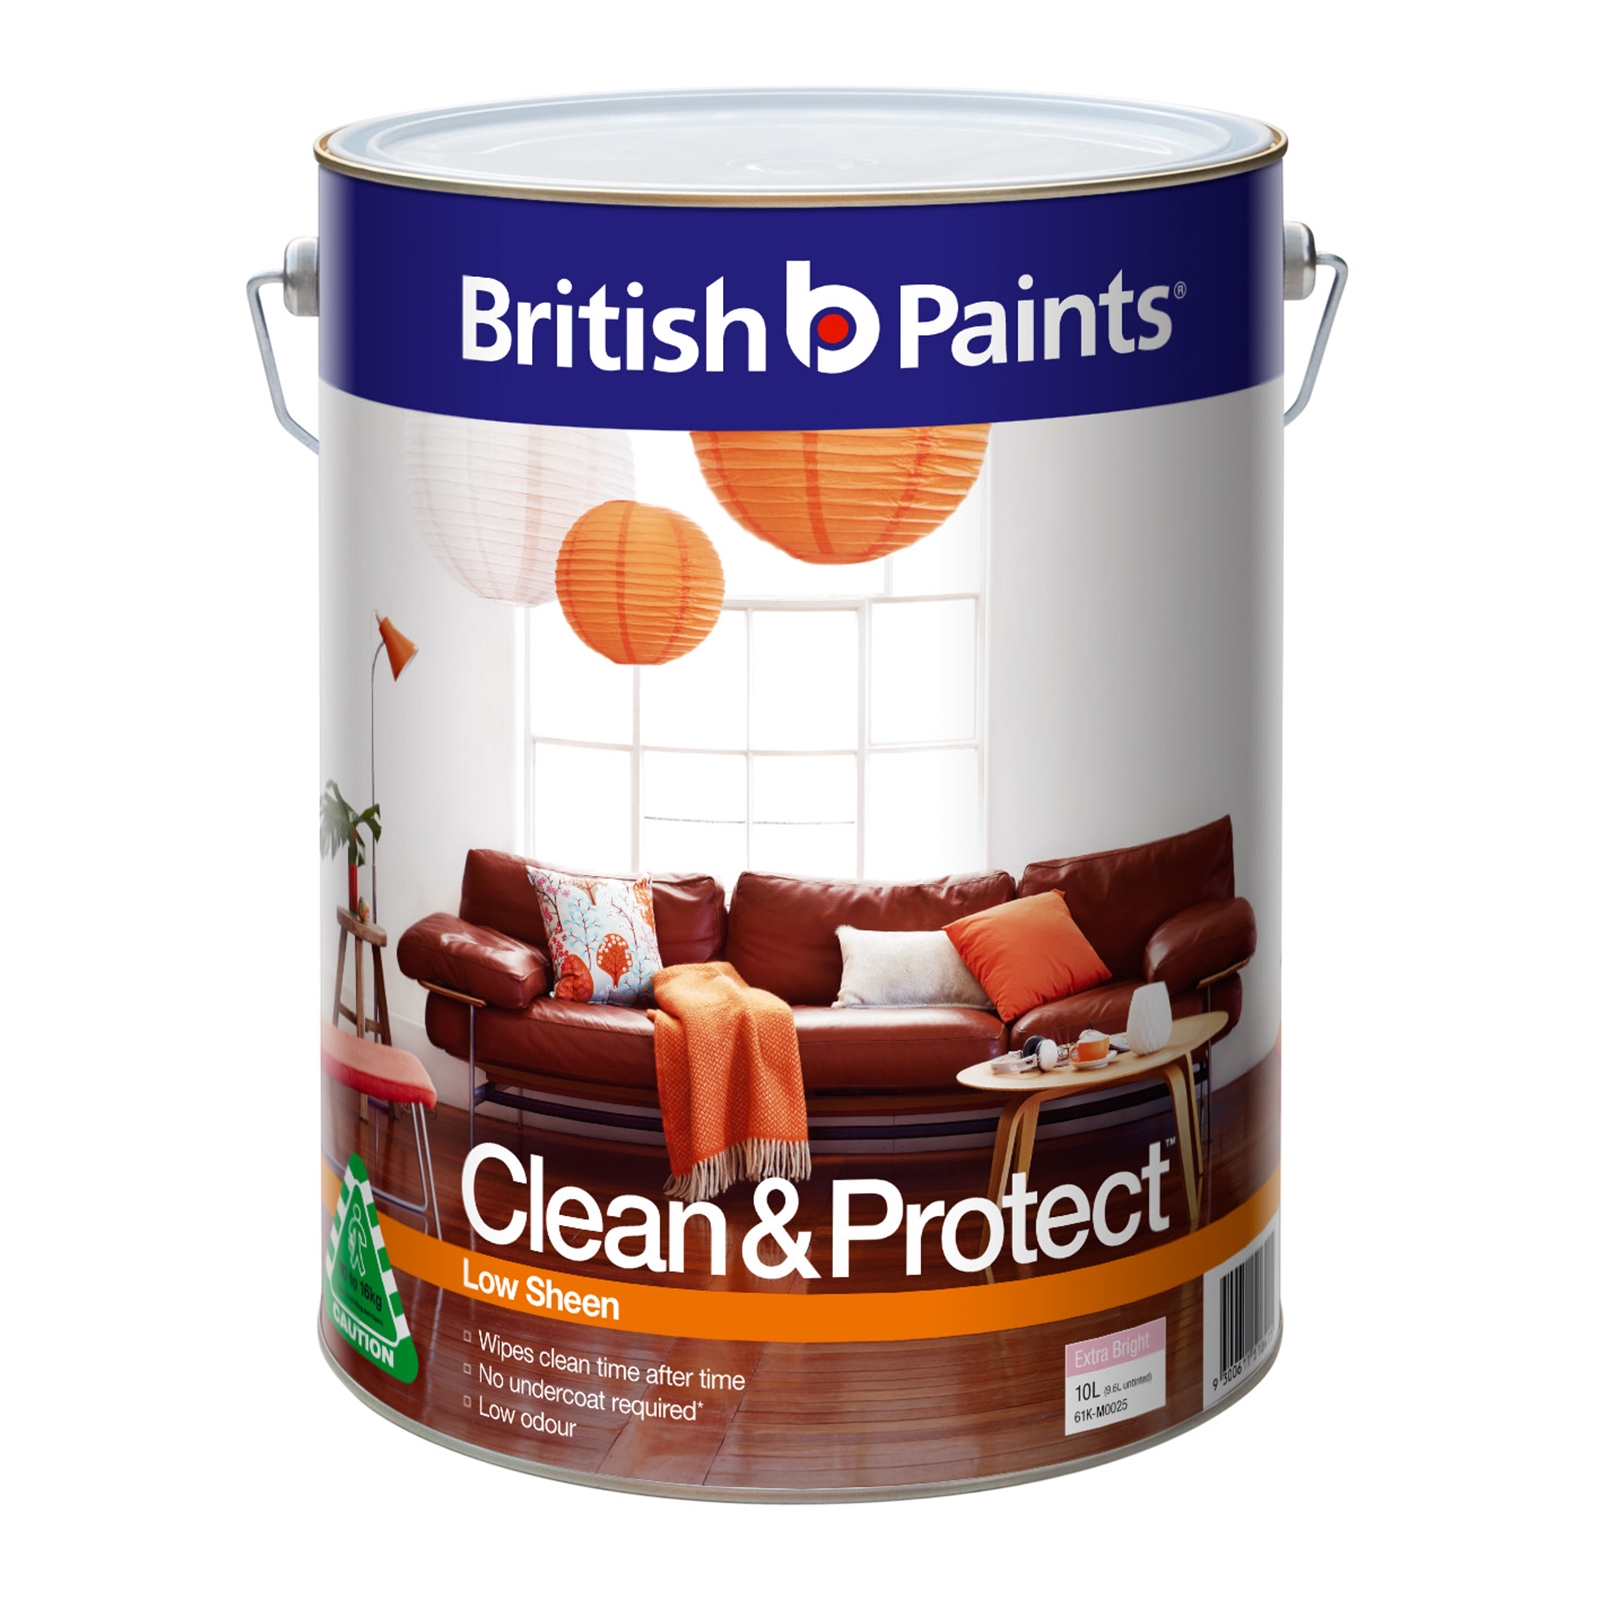 British Paints Clean & Protect 10L Low Sheen Extra Bright Interior Paint